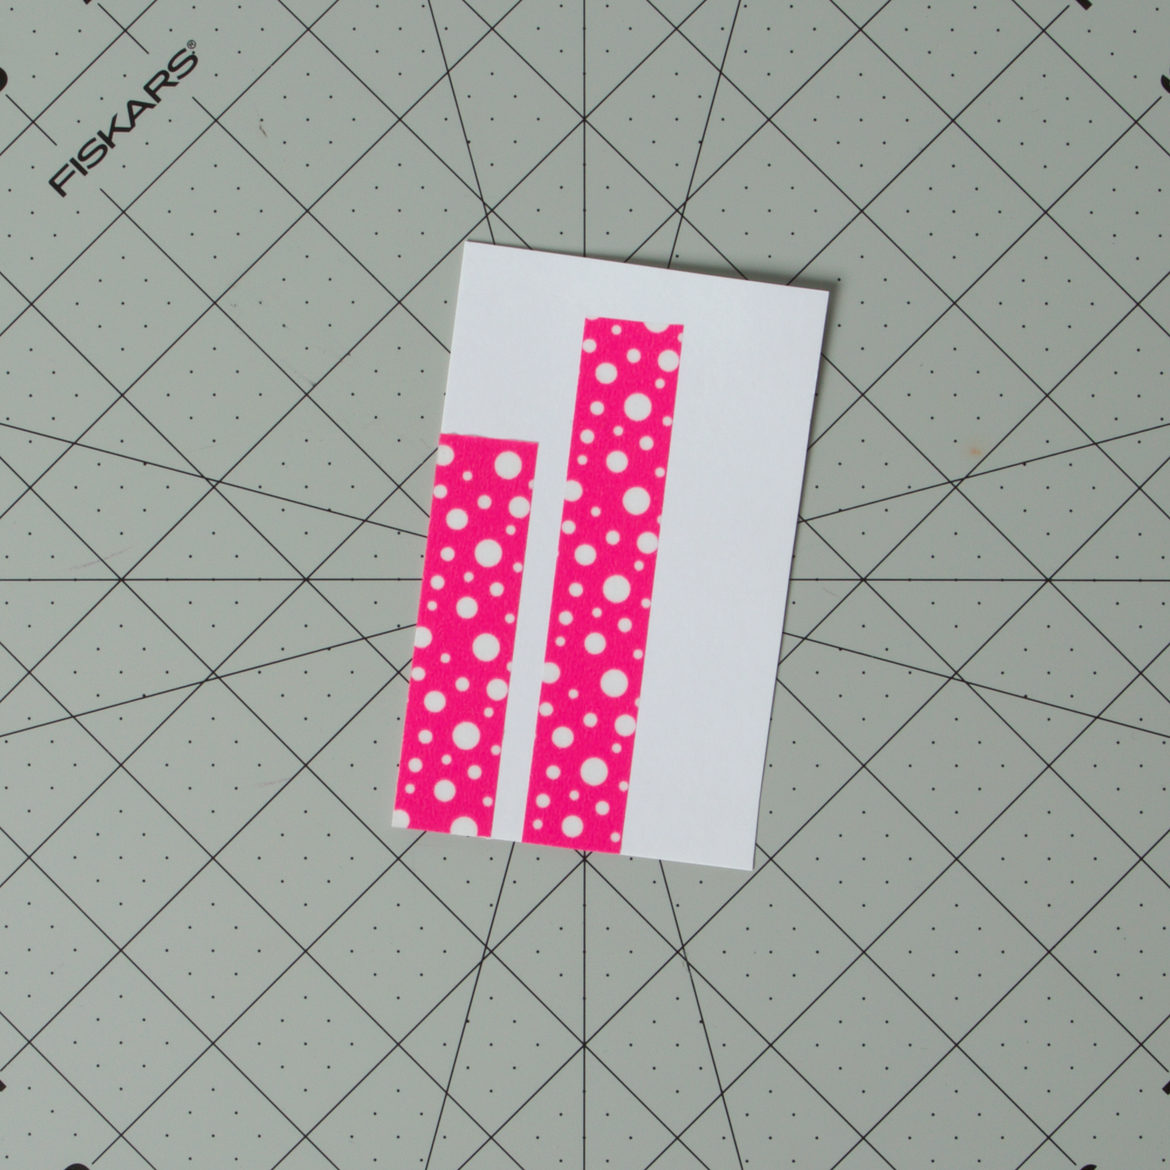 strips of Washi tape applied to a piece of card stock